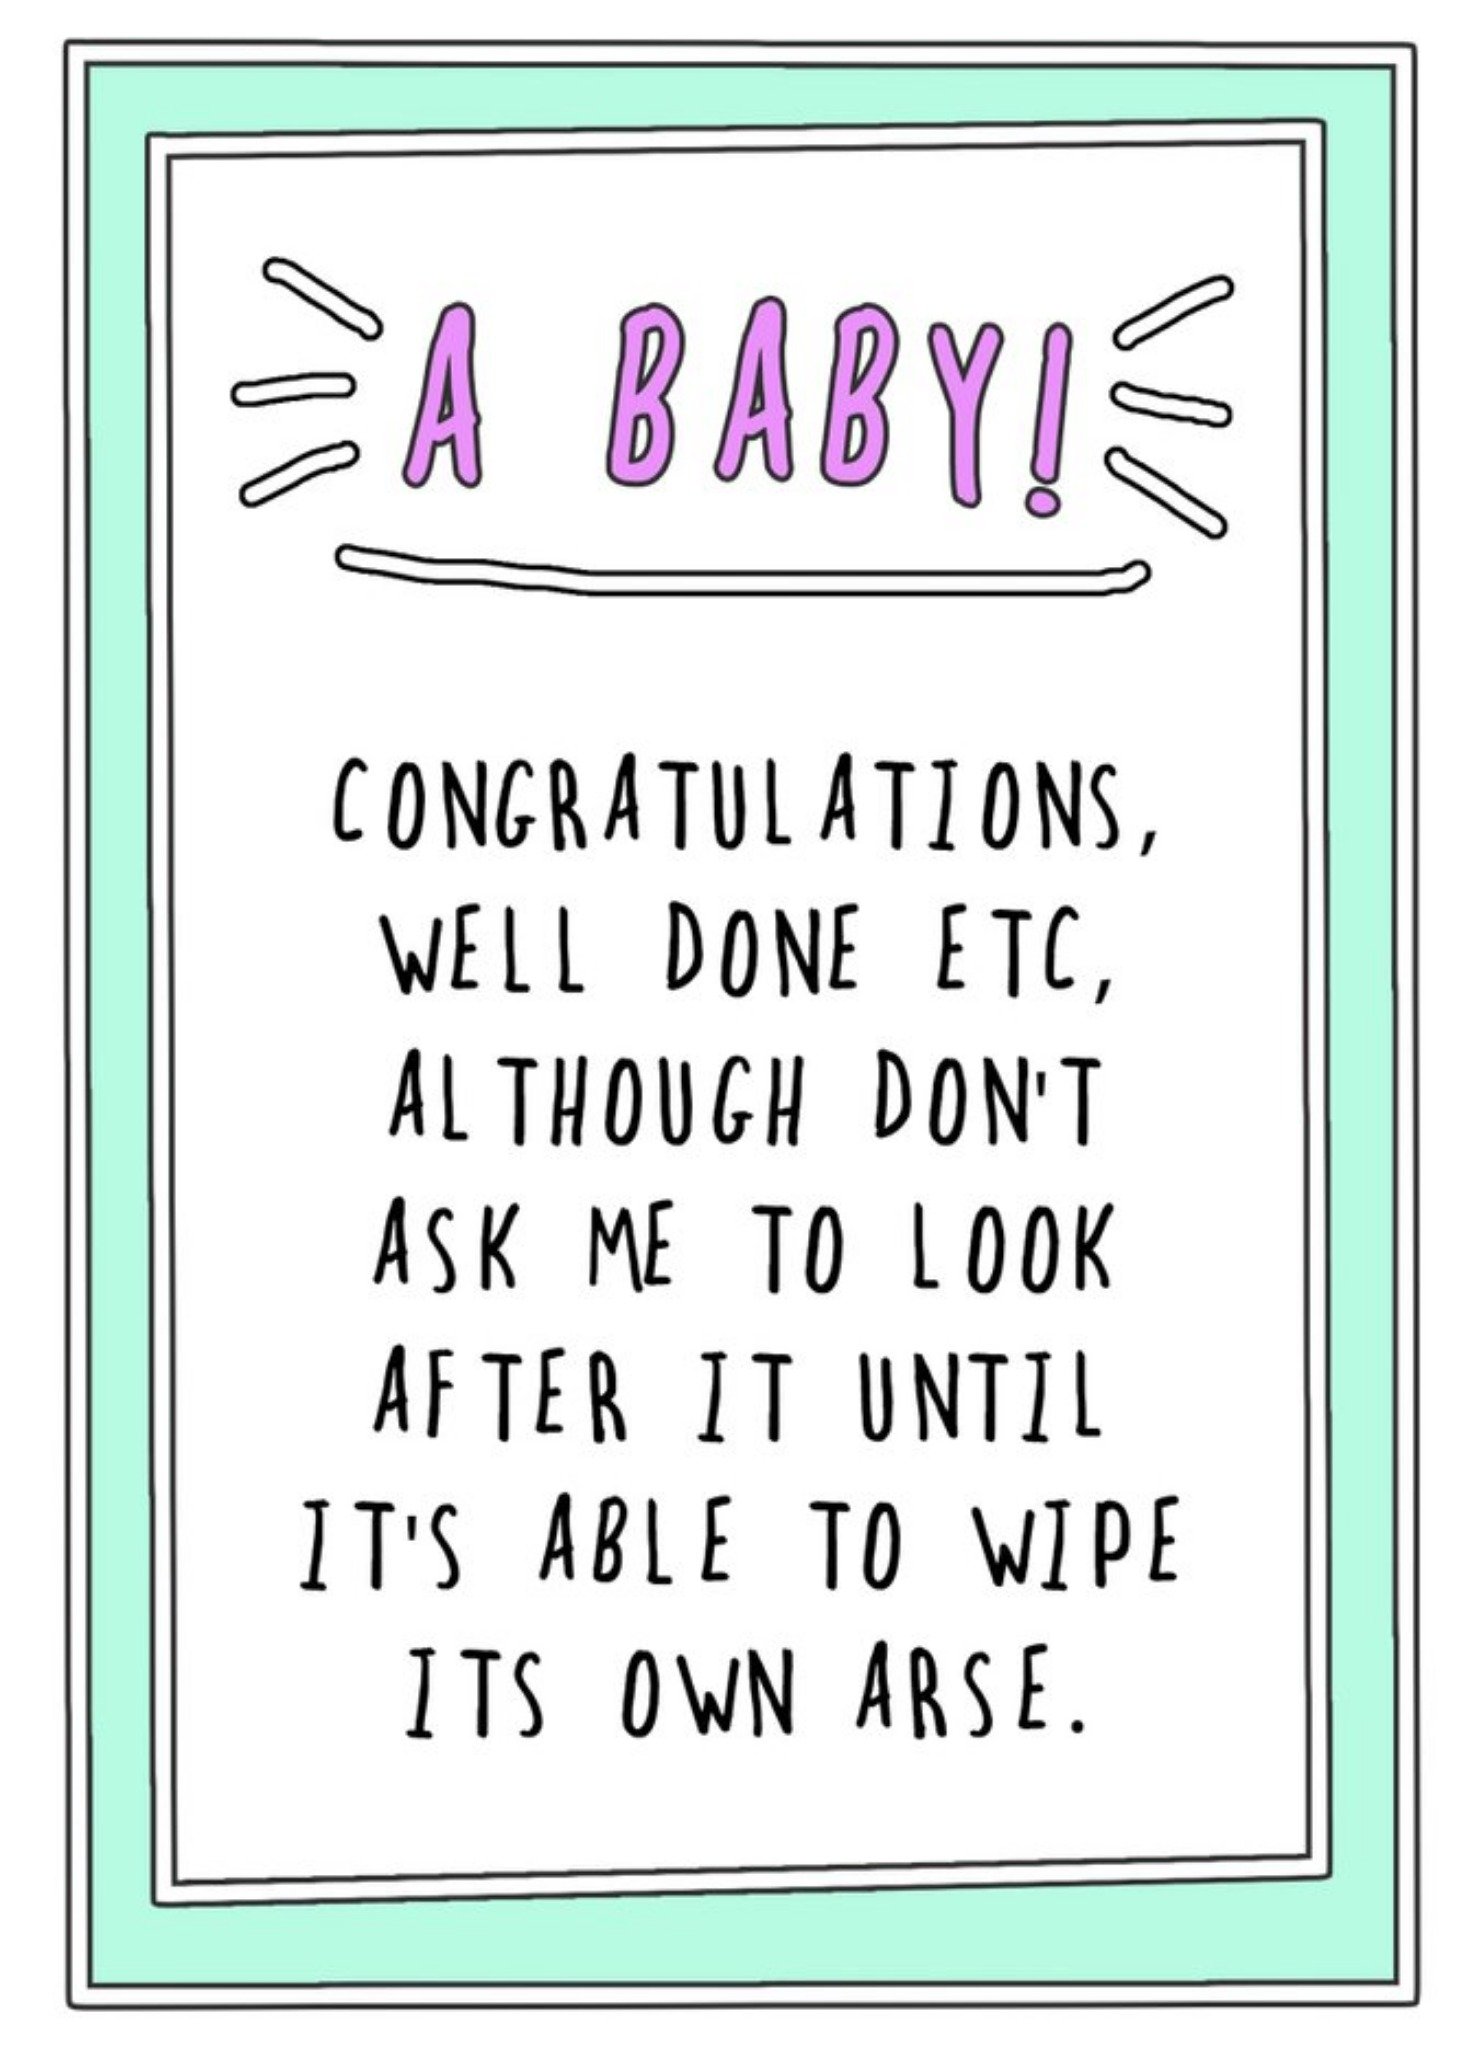 Go La La Funny Congratulations, Well Done Etc Wipe Its Own Arse New Baby Card, Large